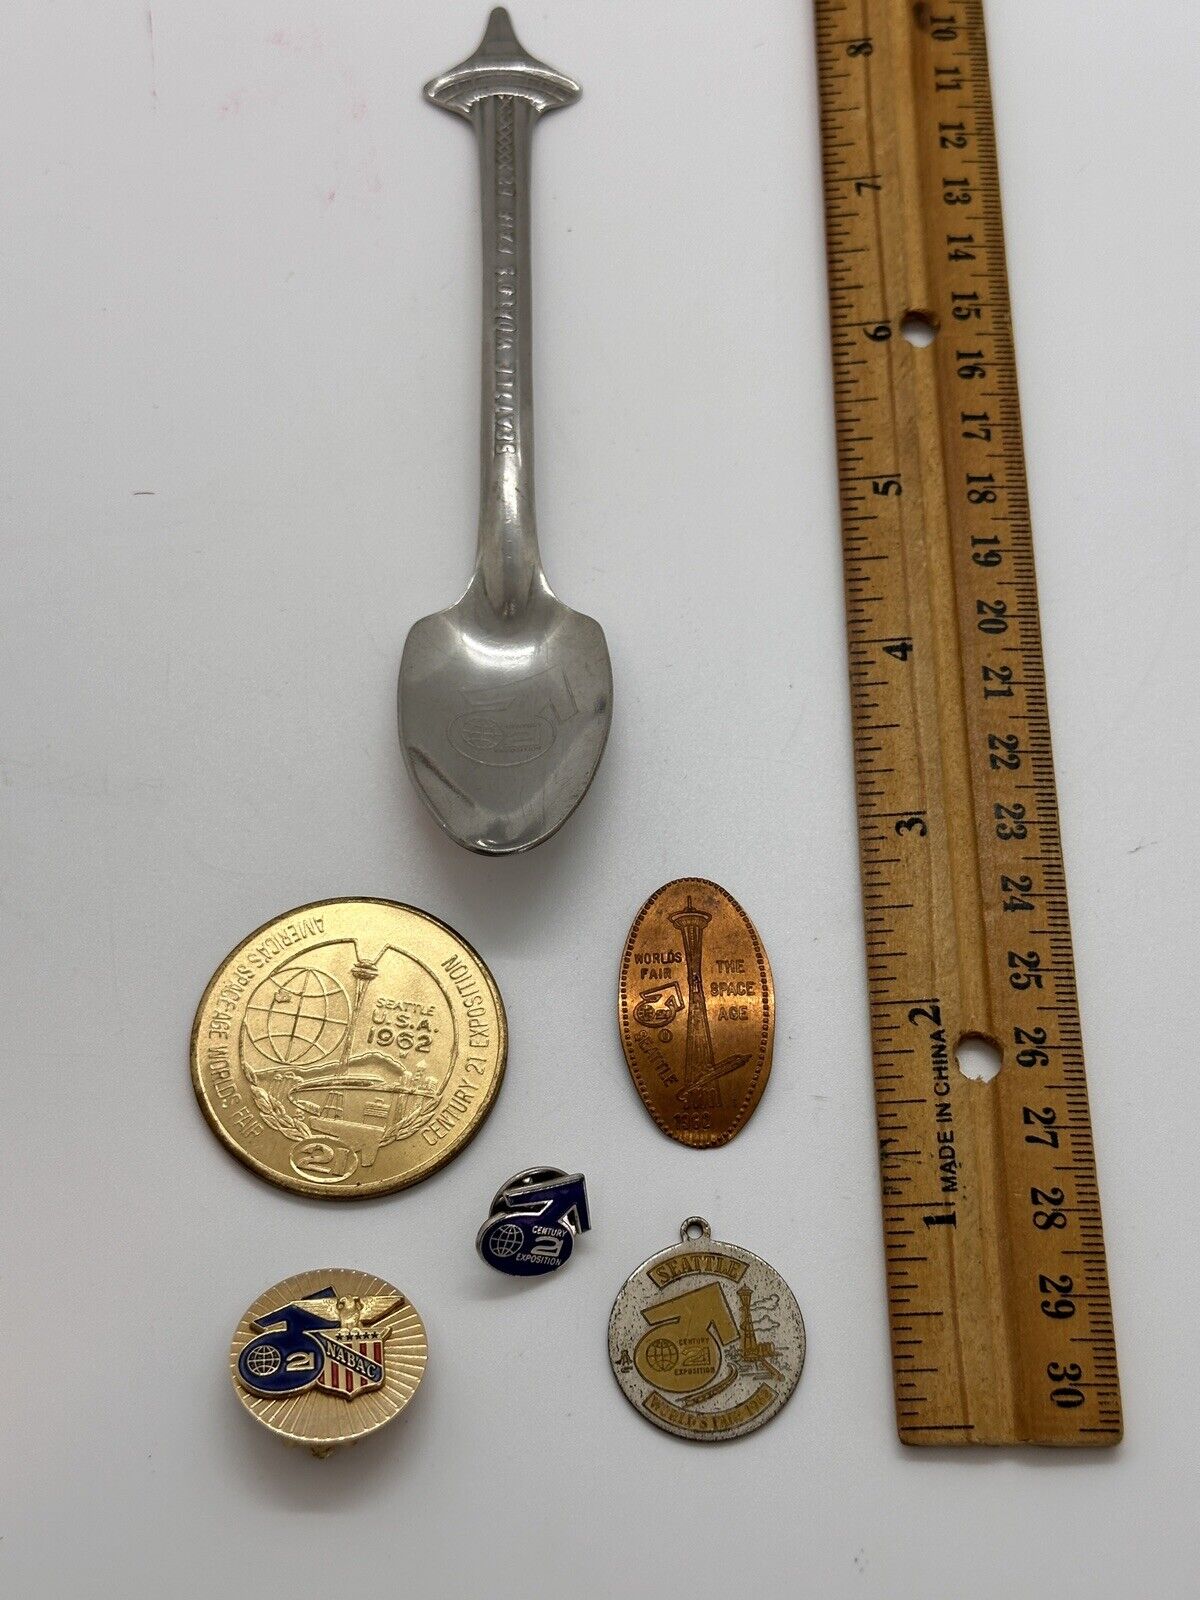 1962 Seattle Worlds Fair Lot SPACE NEEDLE SPOON, Penny, Lapel Pin, Coin, Earring